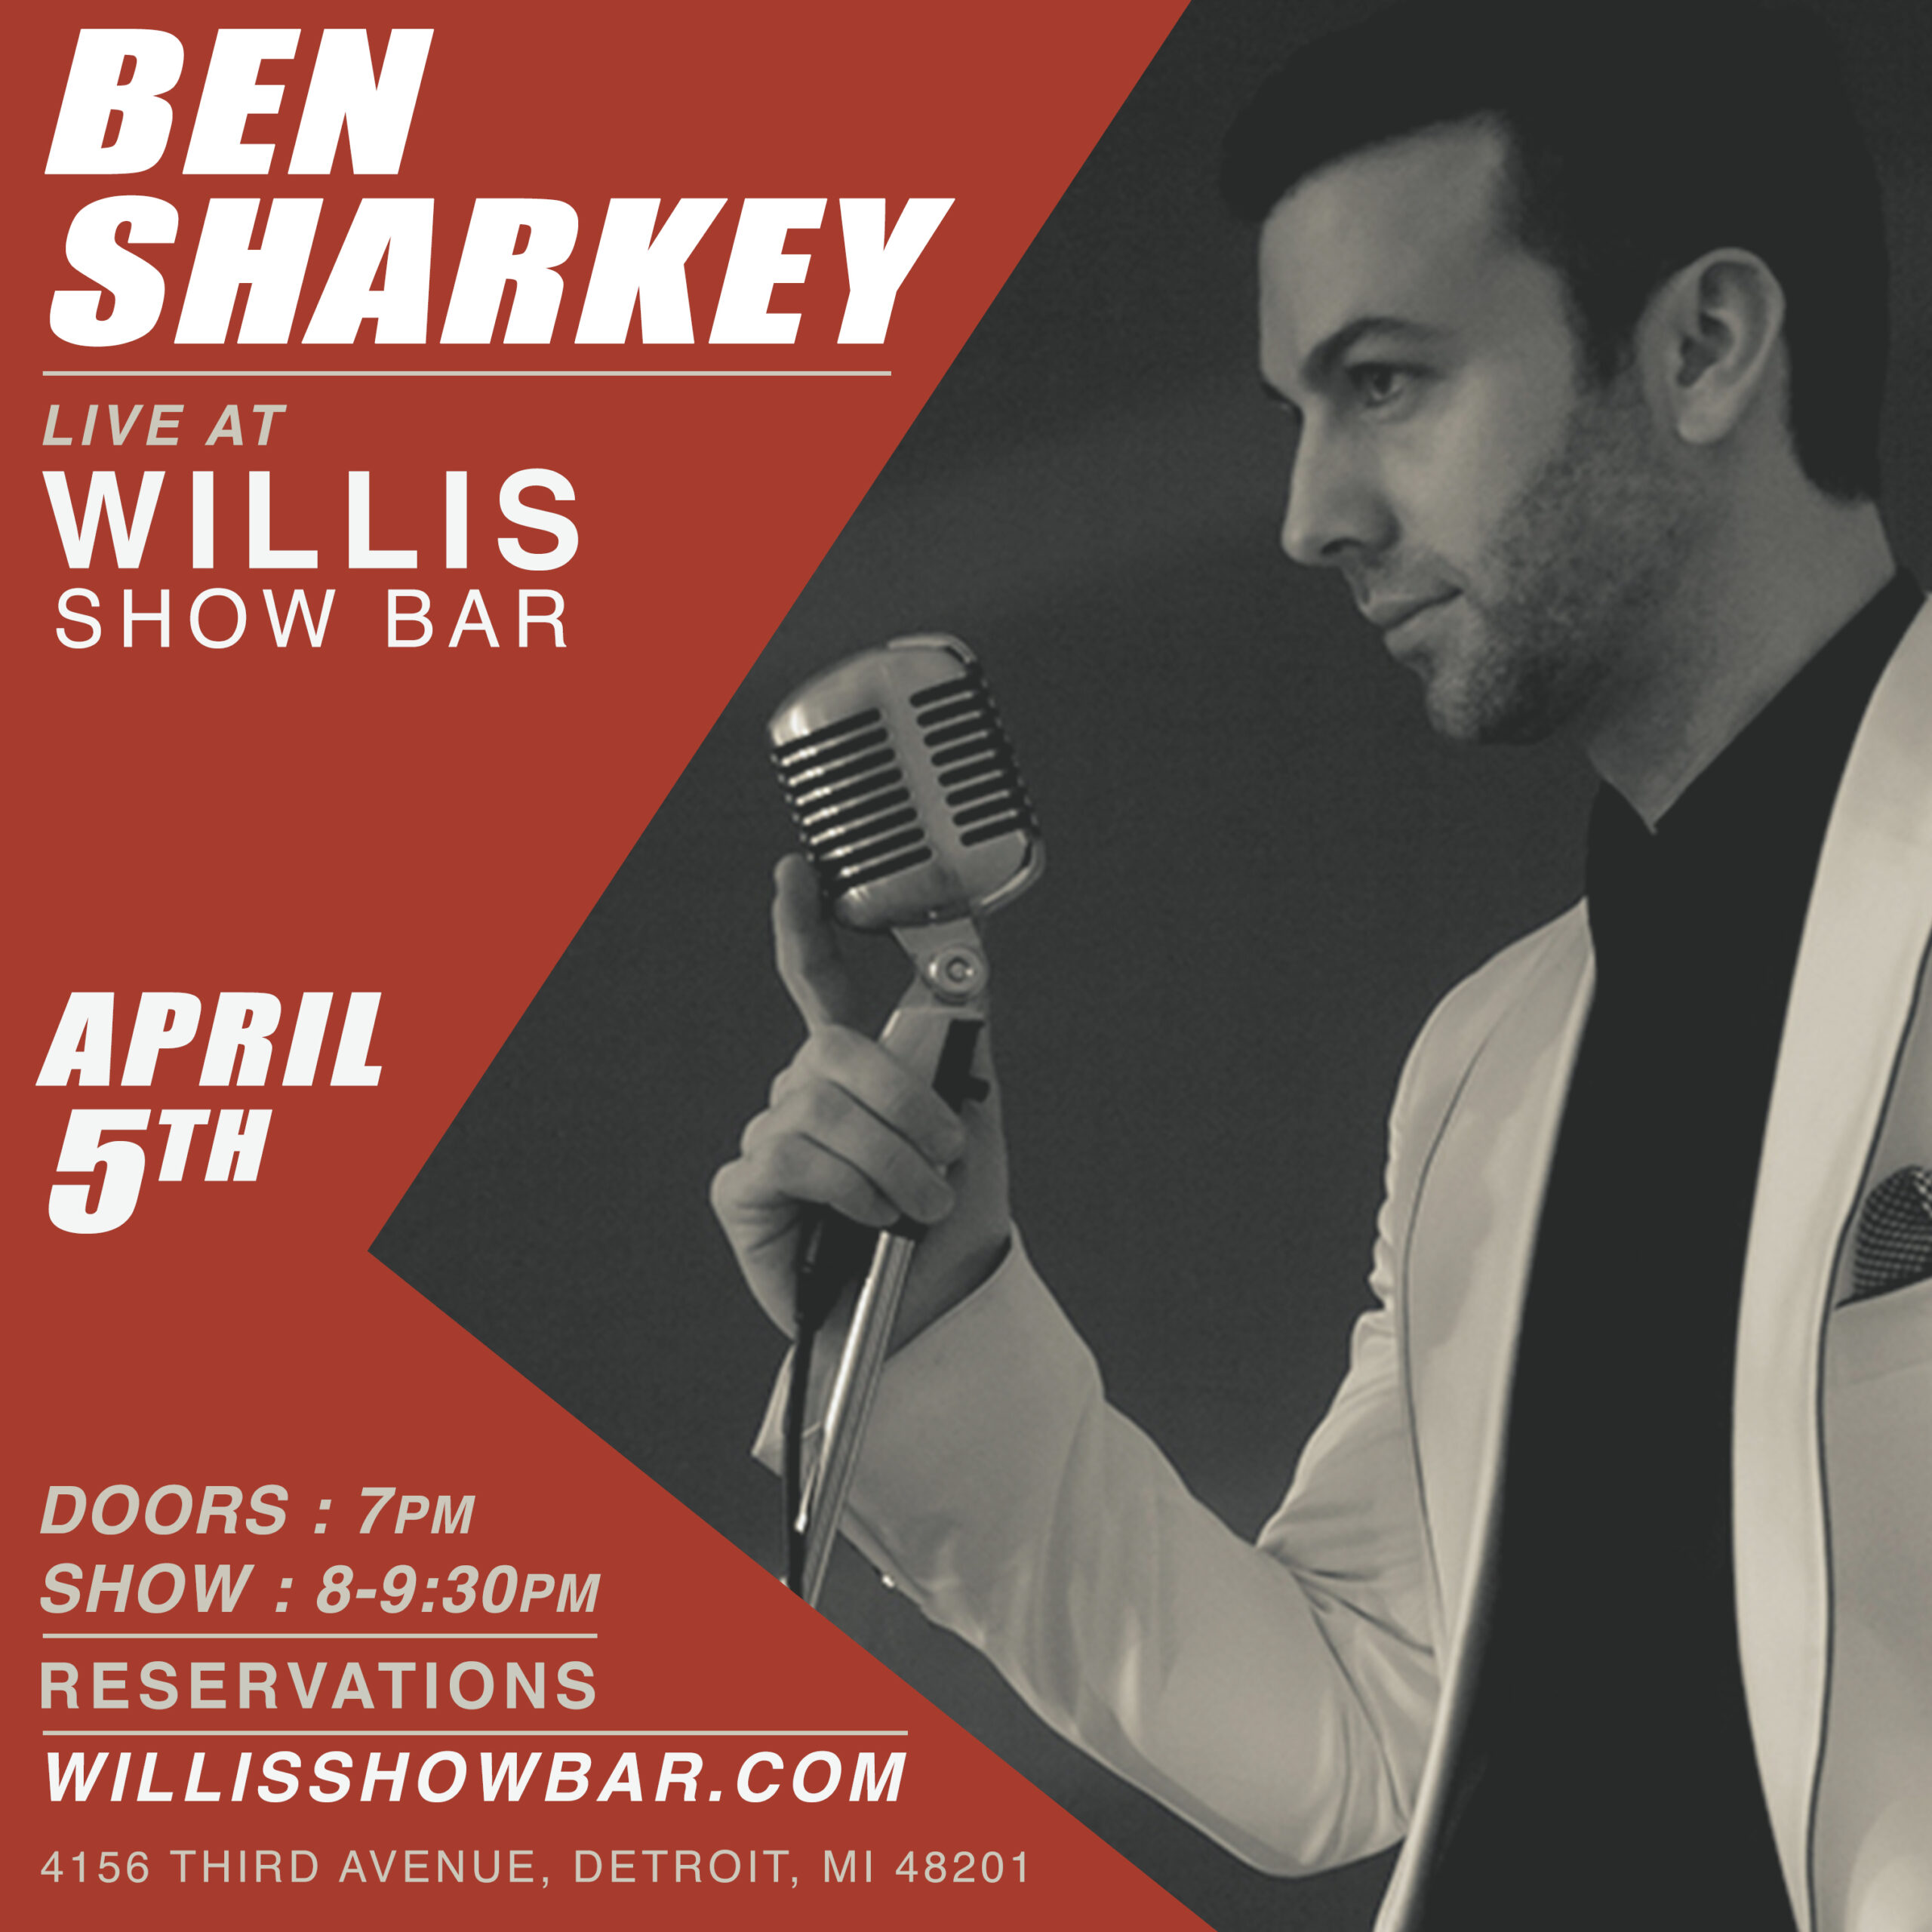 Willis Show Bar — Never a dull moment at this one-of-a-kind space!